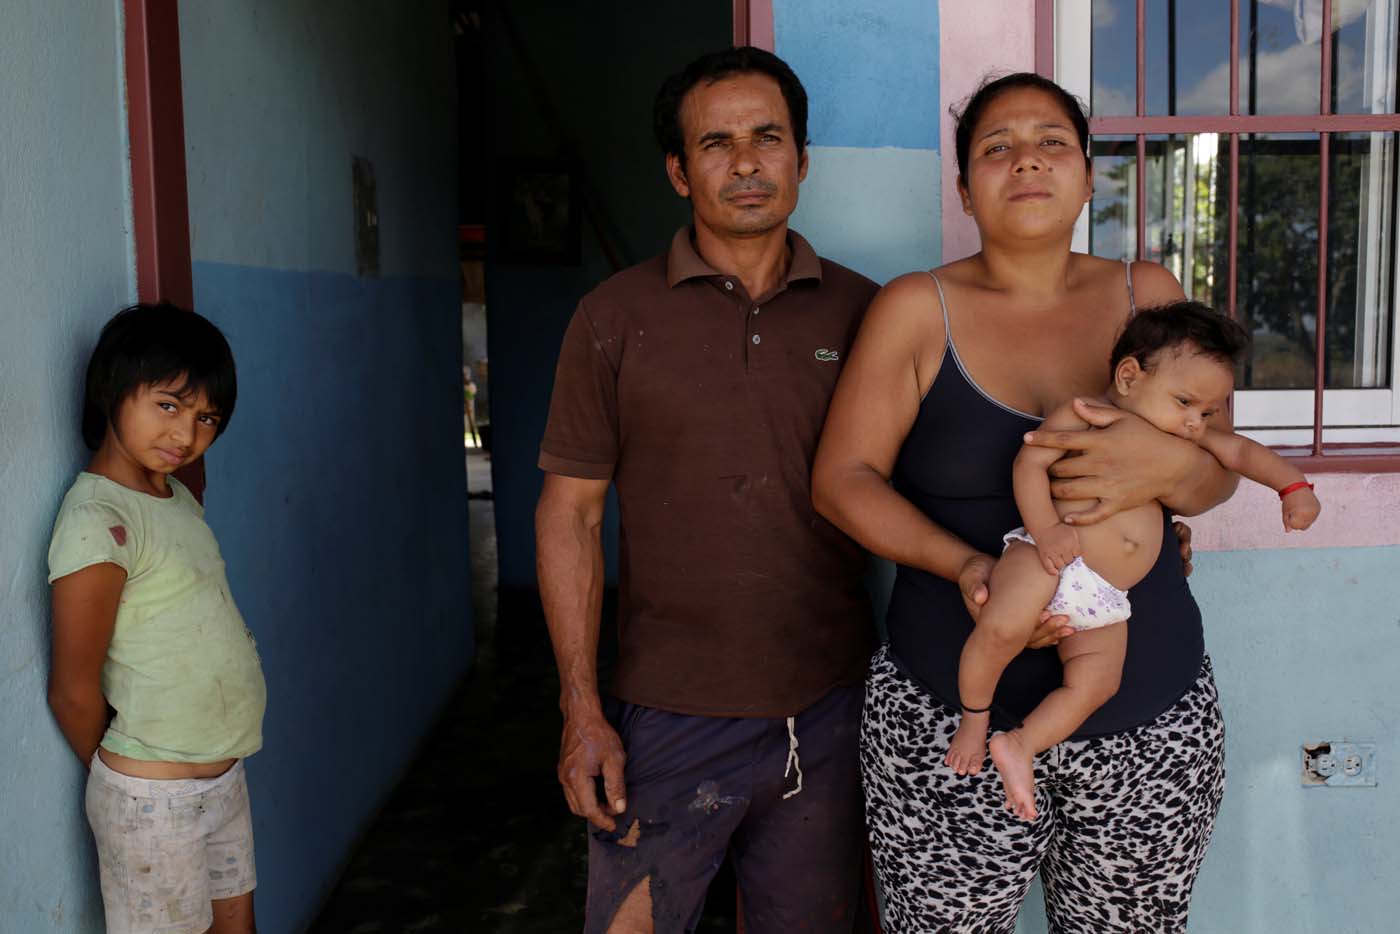 Tulio Medina (C) and Jennifer Vivas (centre R), parents of Eliannys Vivas, who died from diphtheria, pose for a photo with two of their children at the front porch of their home in Pariaguan, Venezuela January 26, 2017. Picture taken January 26, 2017. REUTERS/Marco Bello